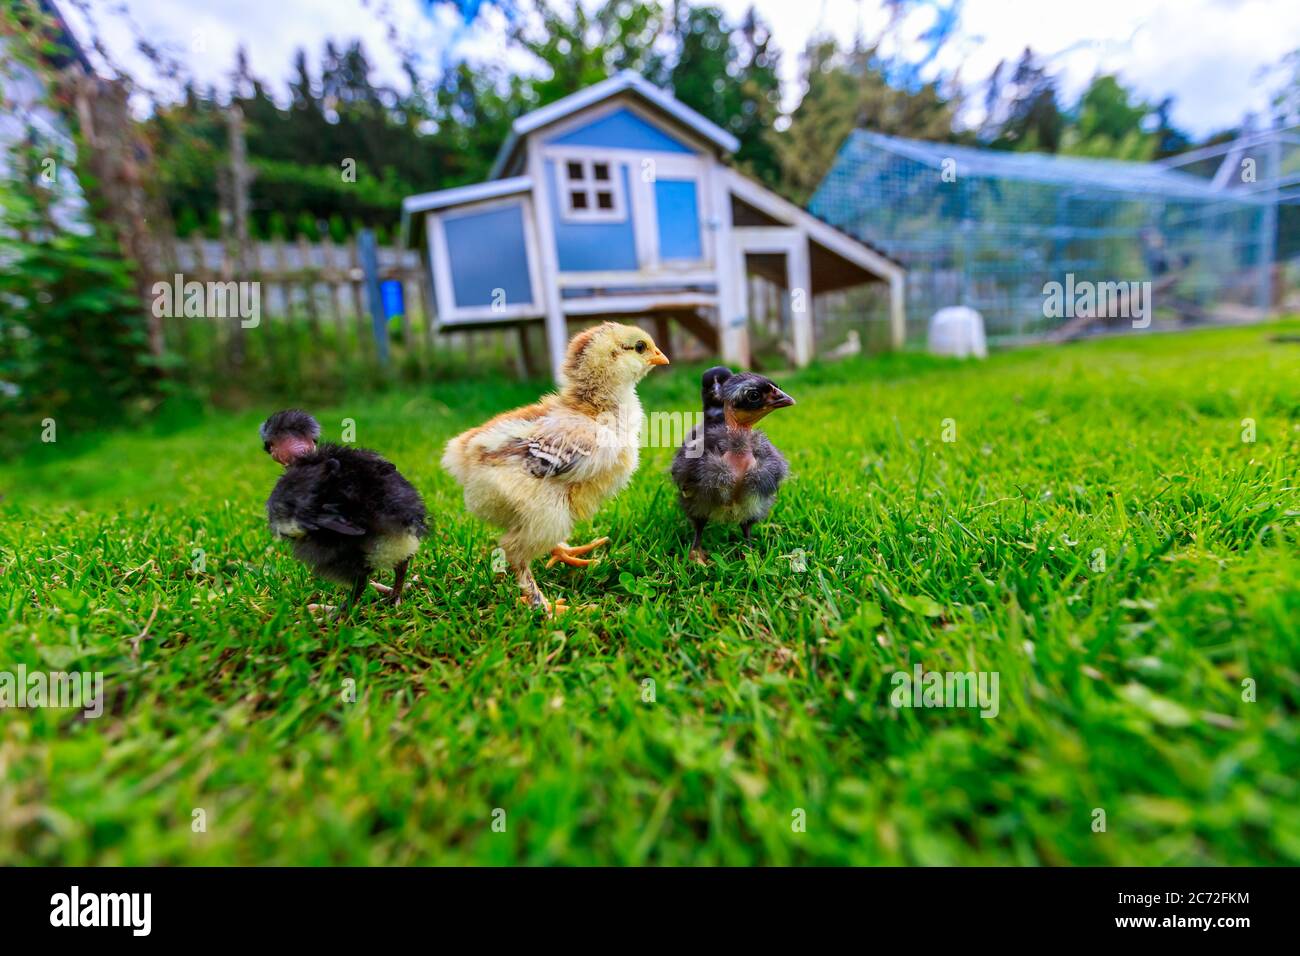 Three little chicks in front of a blue chicken house Stock Photo